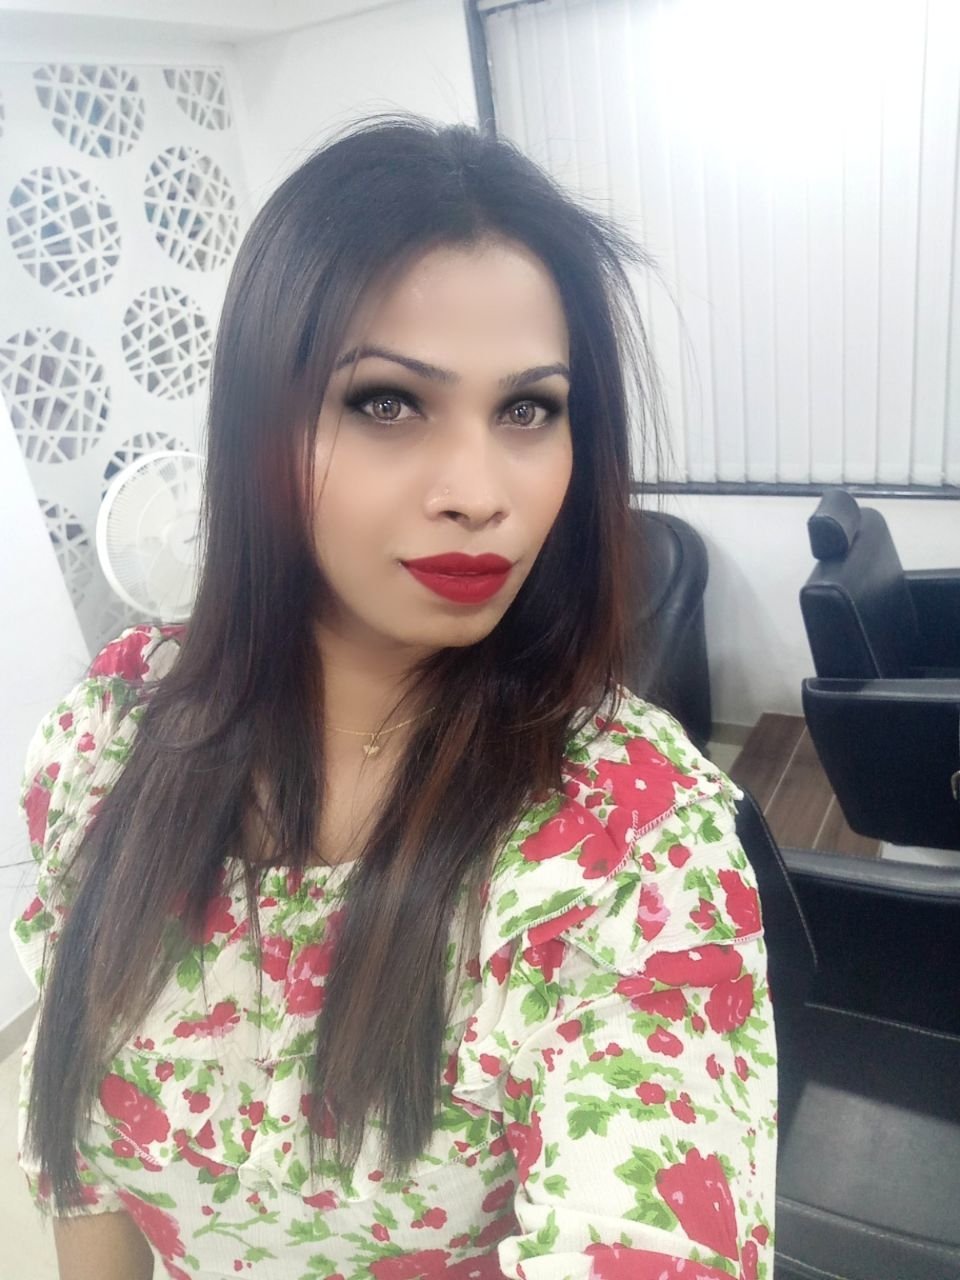 Shemail Number For Sex In Pune - Mayra, Indian Transsexual escort in Pune